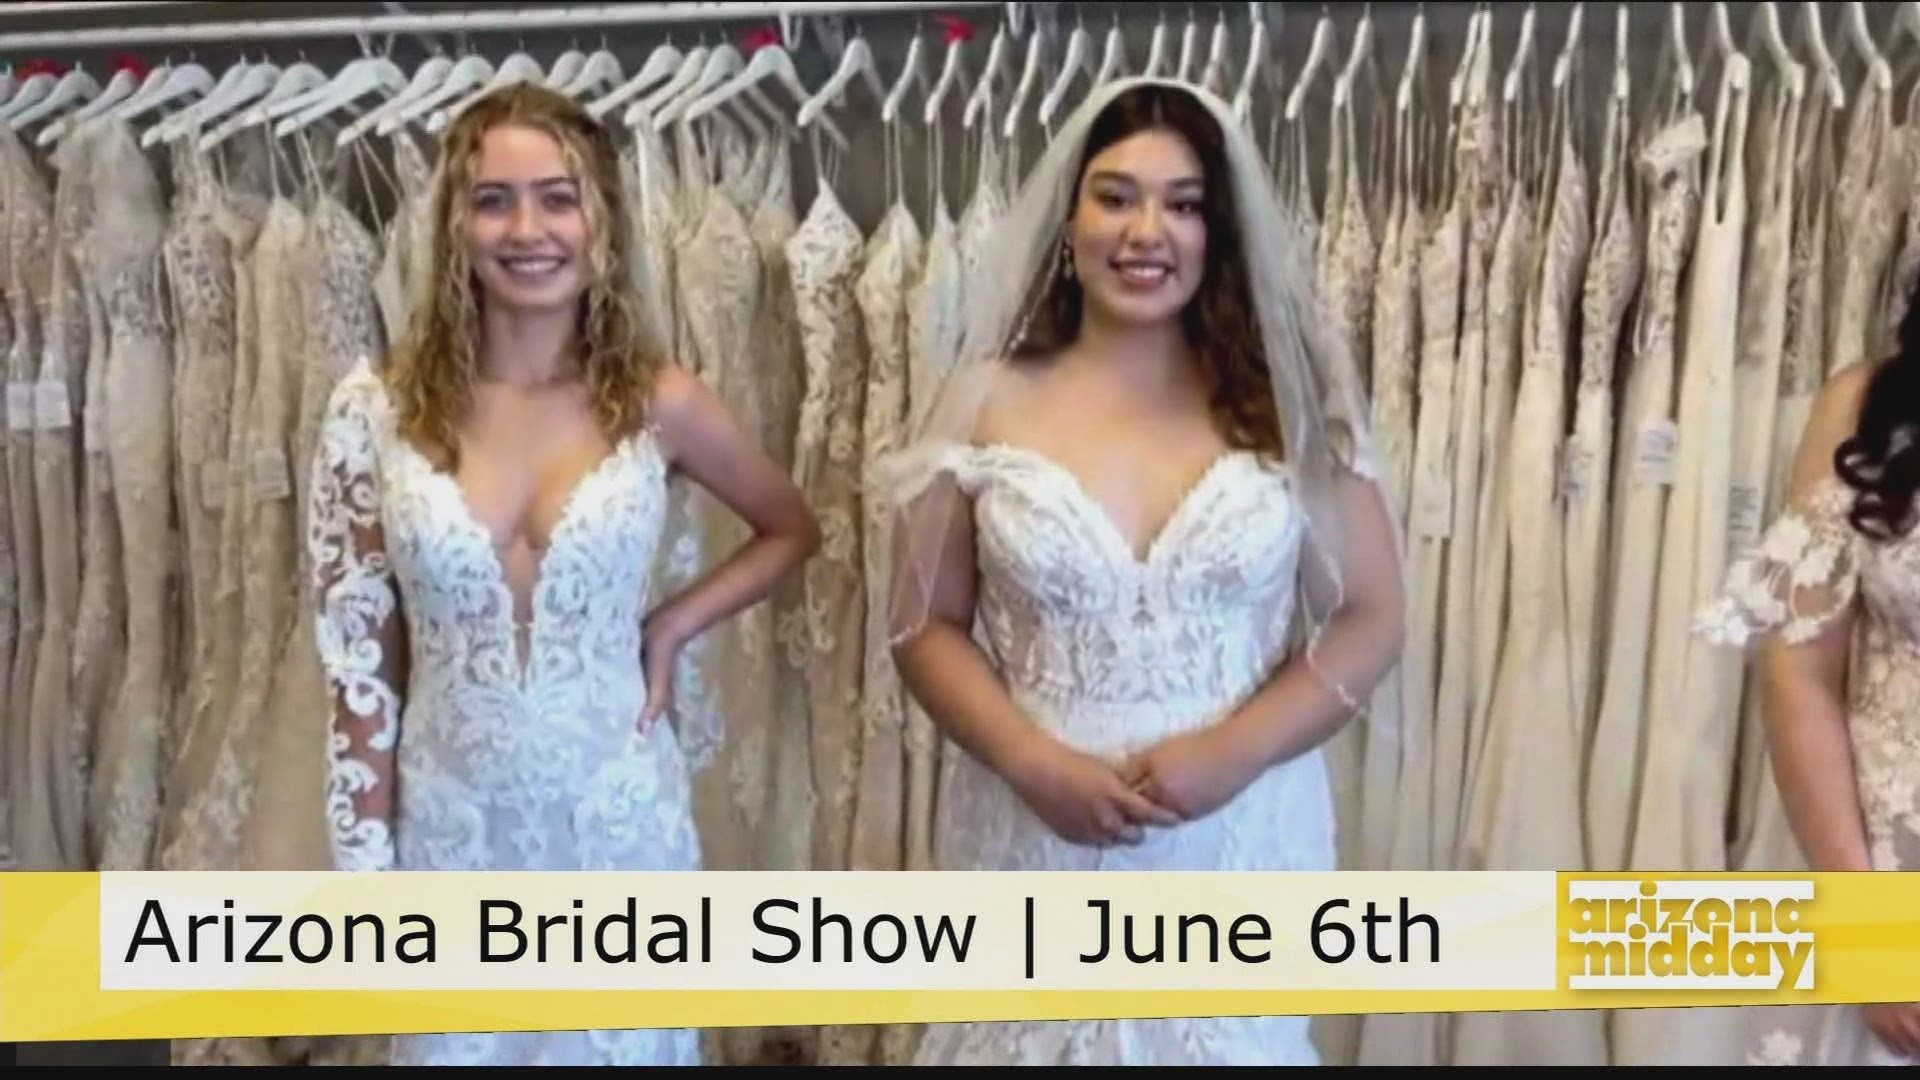 Kim Horn, Master Wedding Planner, shows us the latest trends plus what you can check out at this year's Arizona Bridal show on June 6th